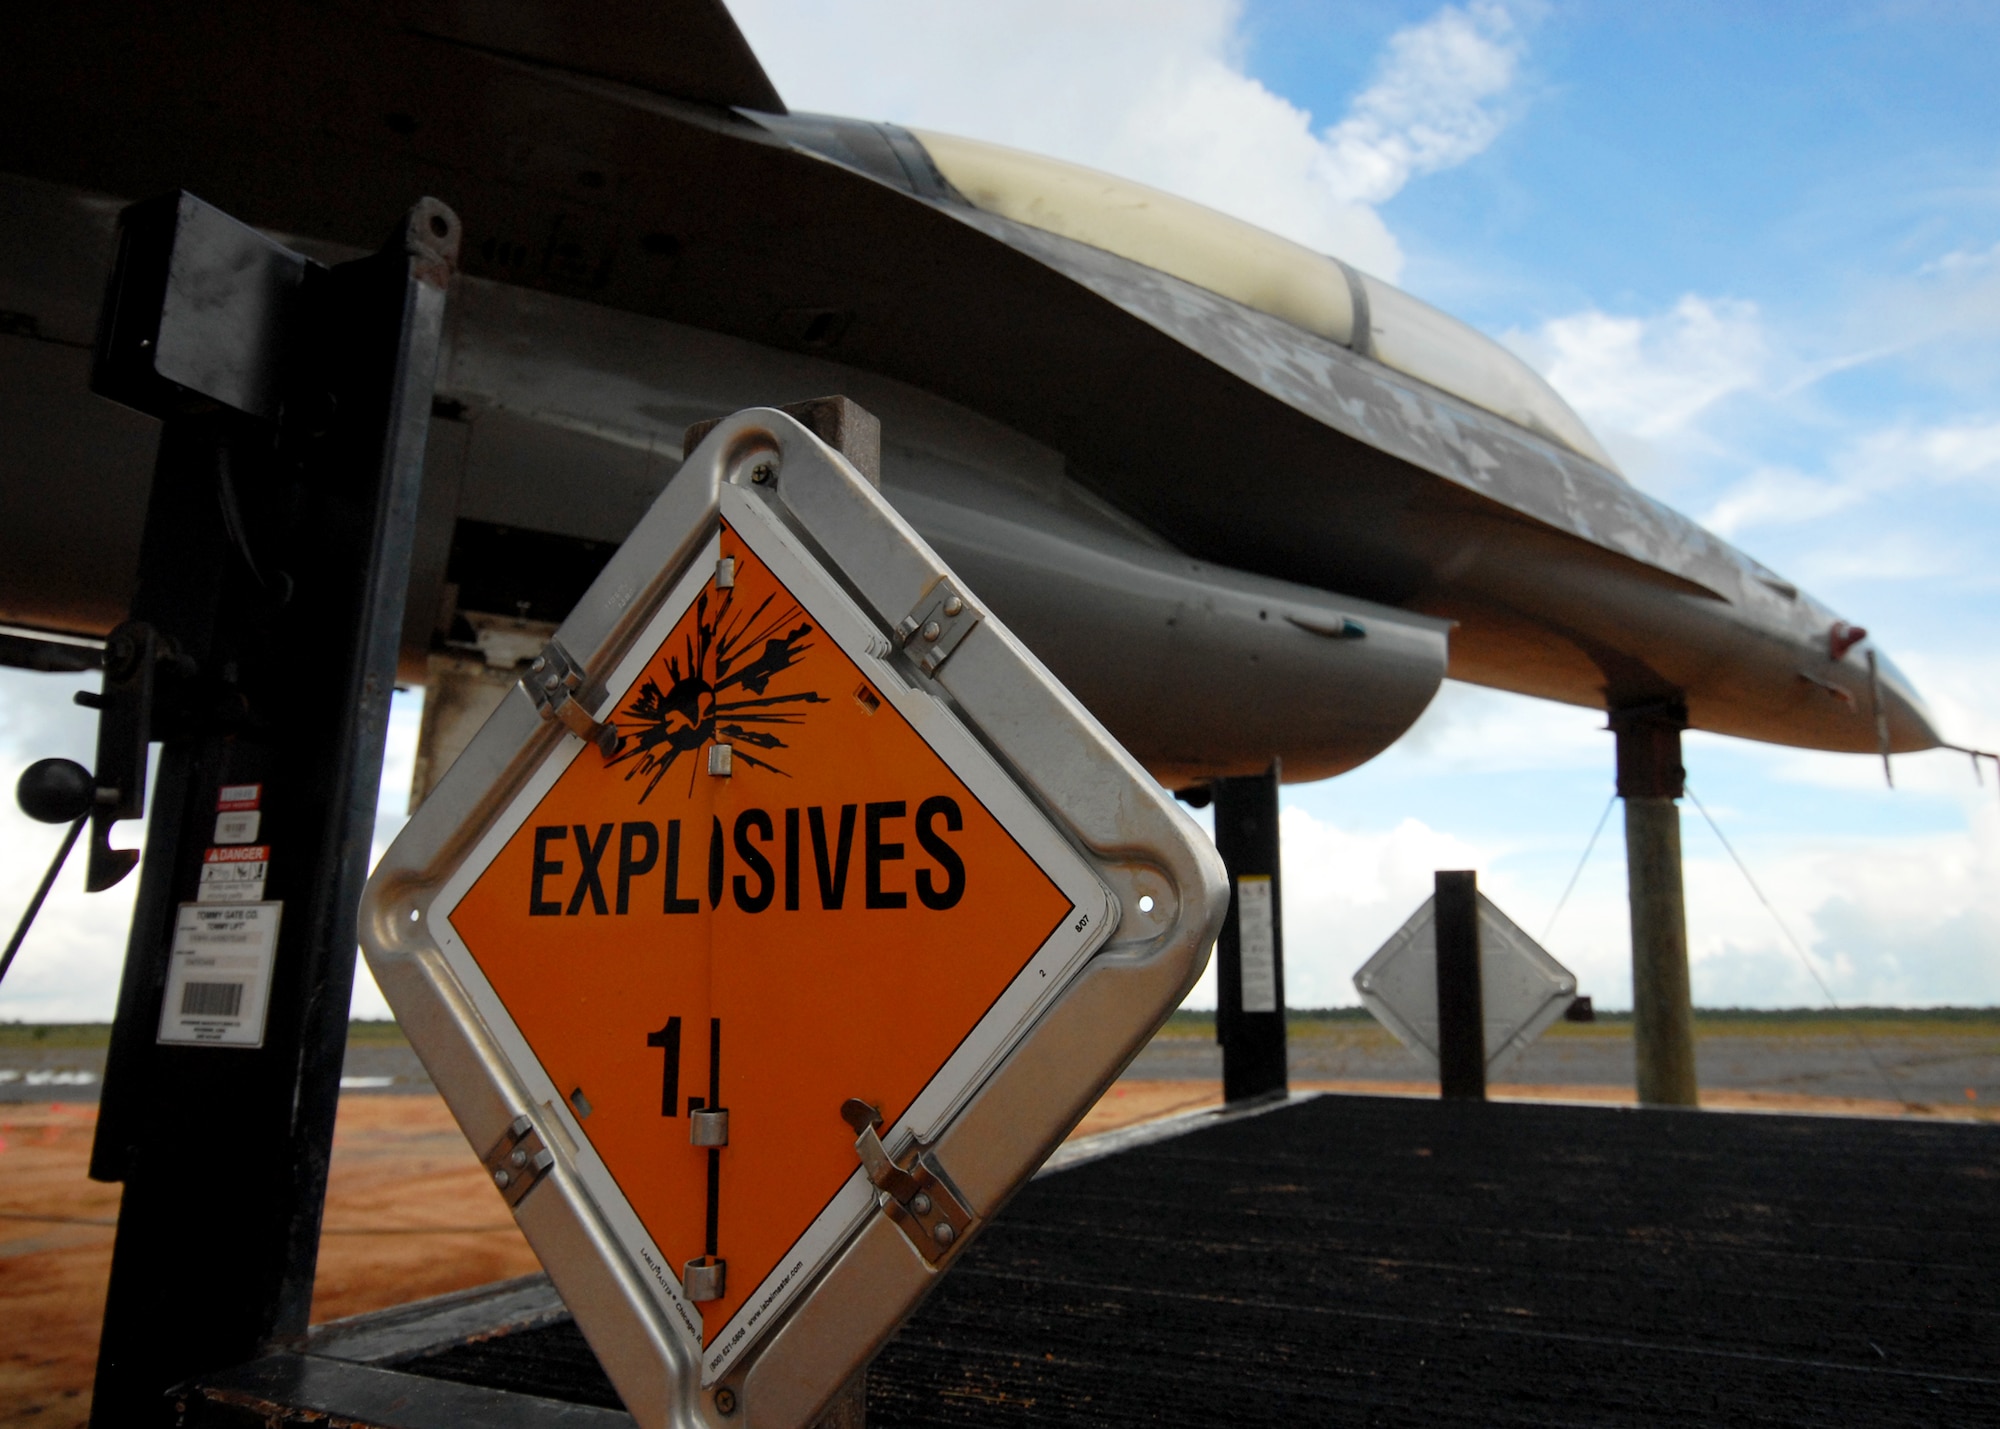 An F-16 Fighting Falcon from the 40th Flight Test Squadron awaits its fiery fate Aug. 19 on the Eglin Air Force Base range.  The aircraft was exploded as part of a test of the flight termination system to be used in the QF-16.  The purpose was to demonstrate that the FTS design will be sufficient to immediately terminate the flight of a QF-16, as well as to determine a range safety debris footprint.  (U.S. Air Force photo/Samuel King Jr.)